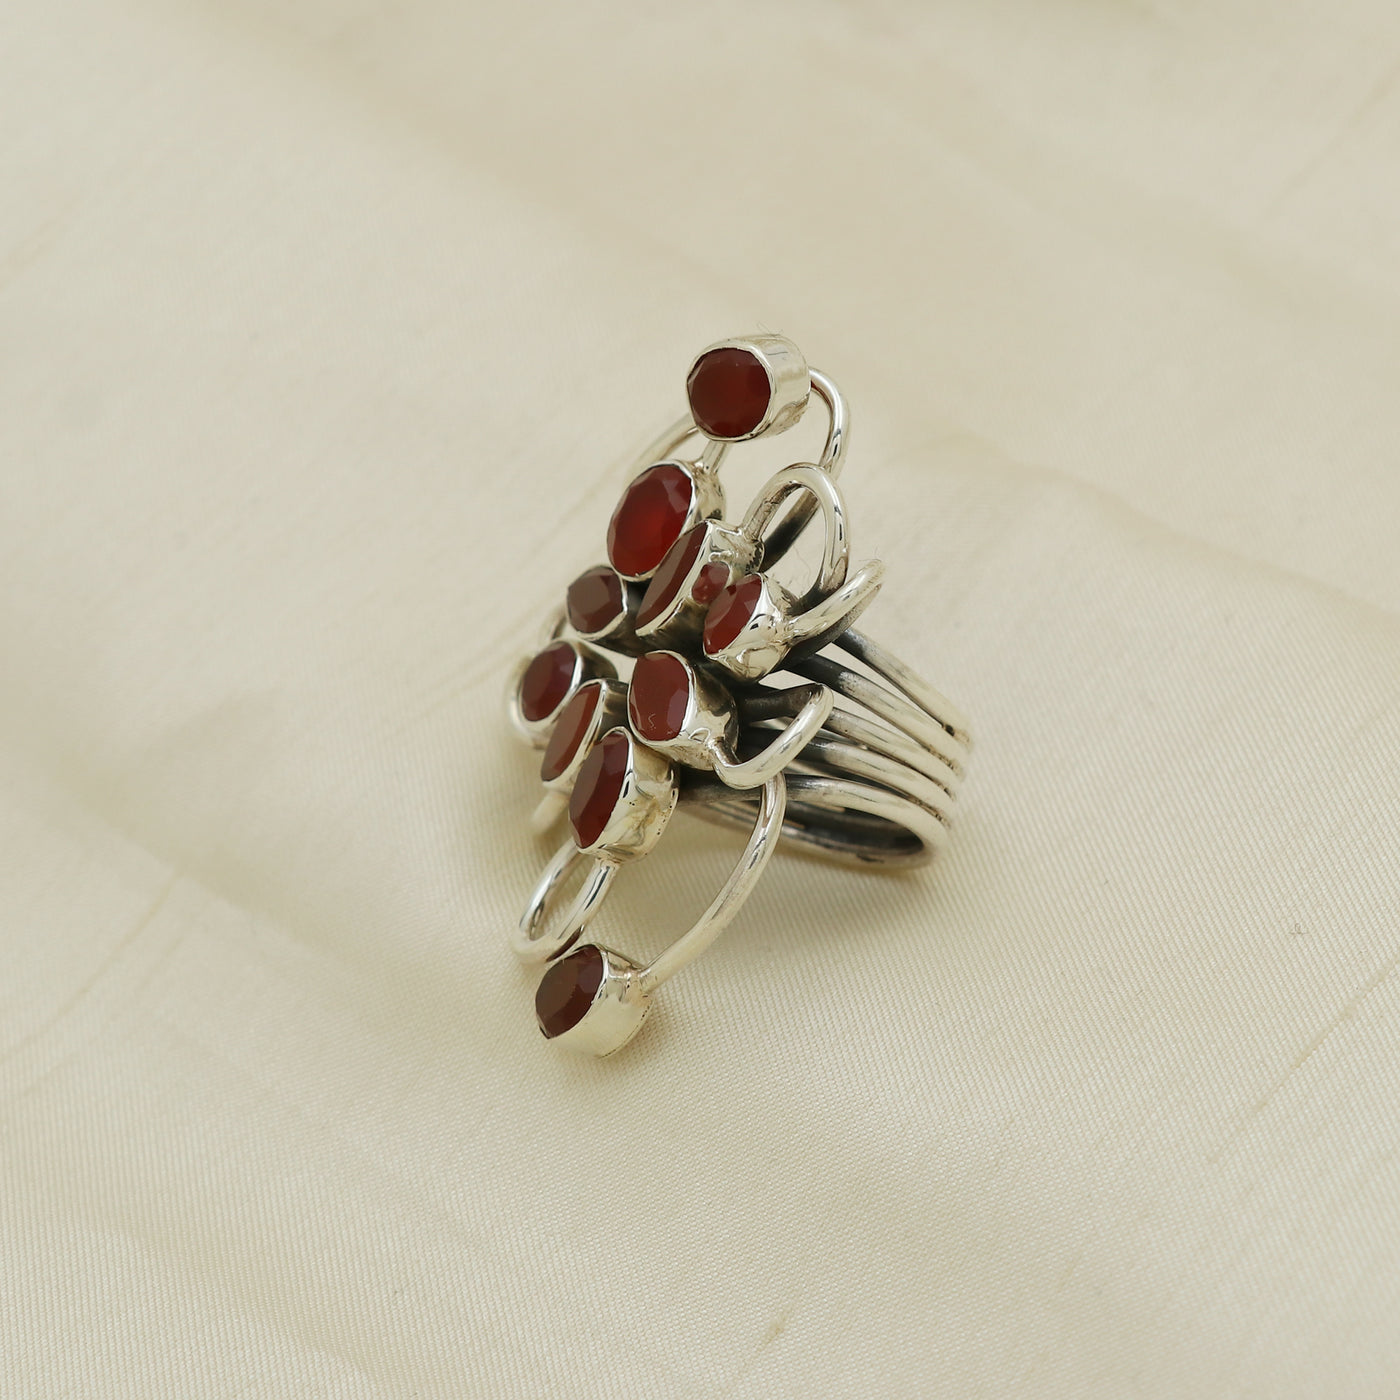 Springy Red Onyx Ring